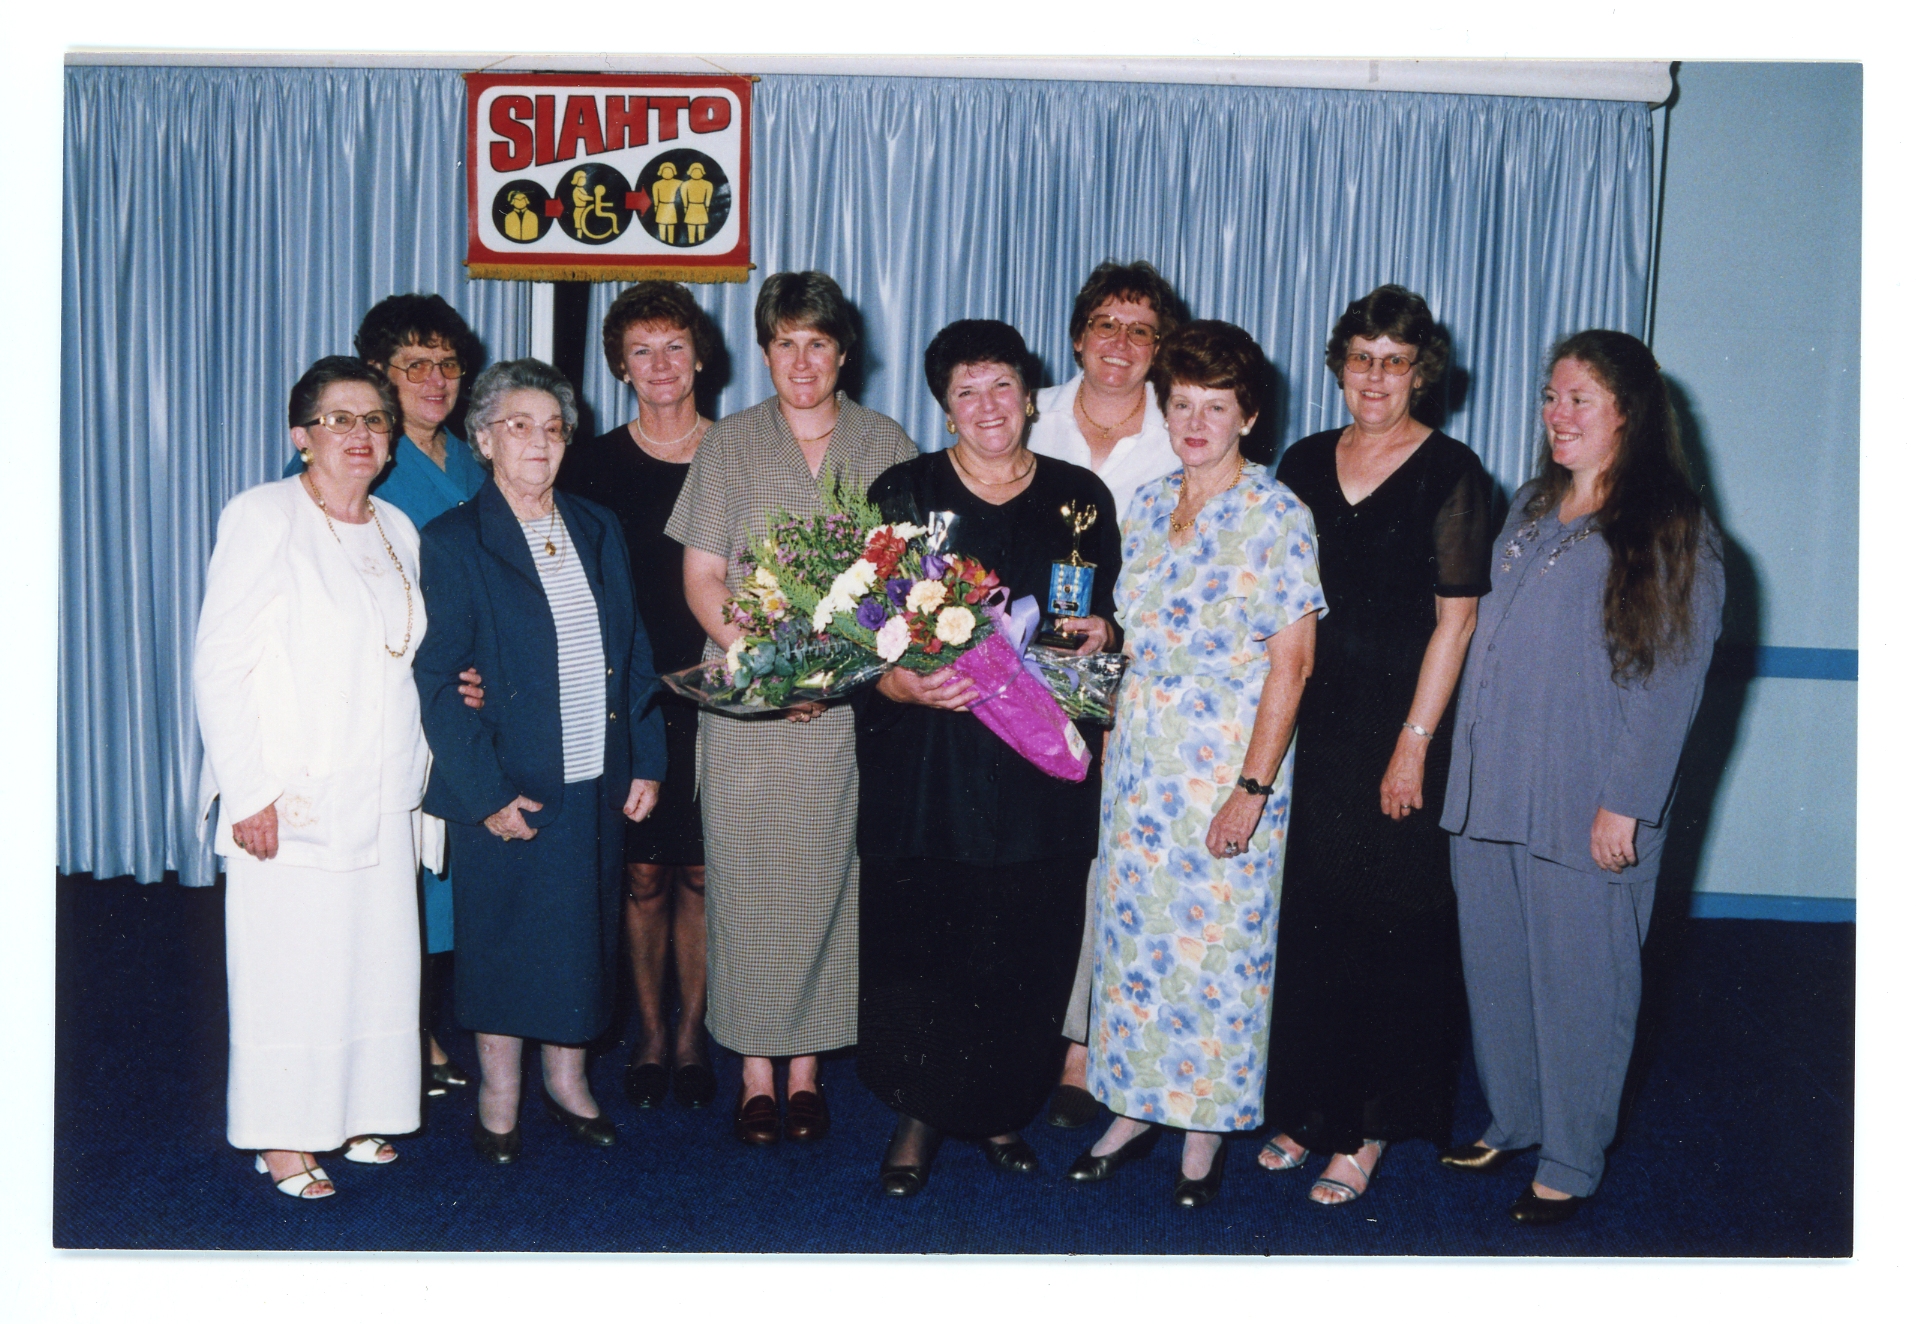 Nominations open for SIAHTO Woman of the Year Award